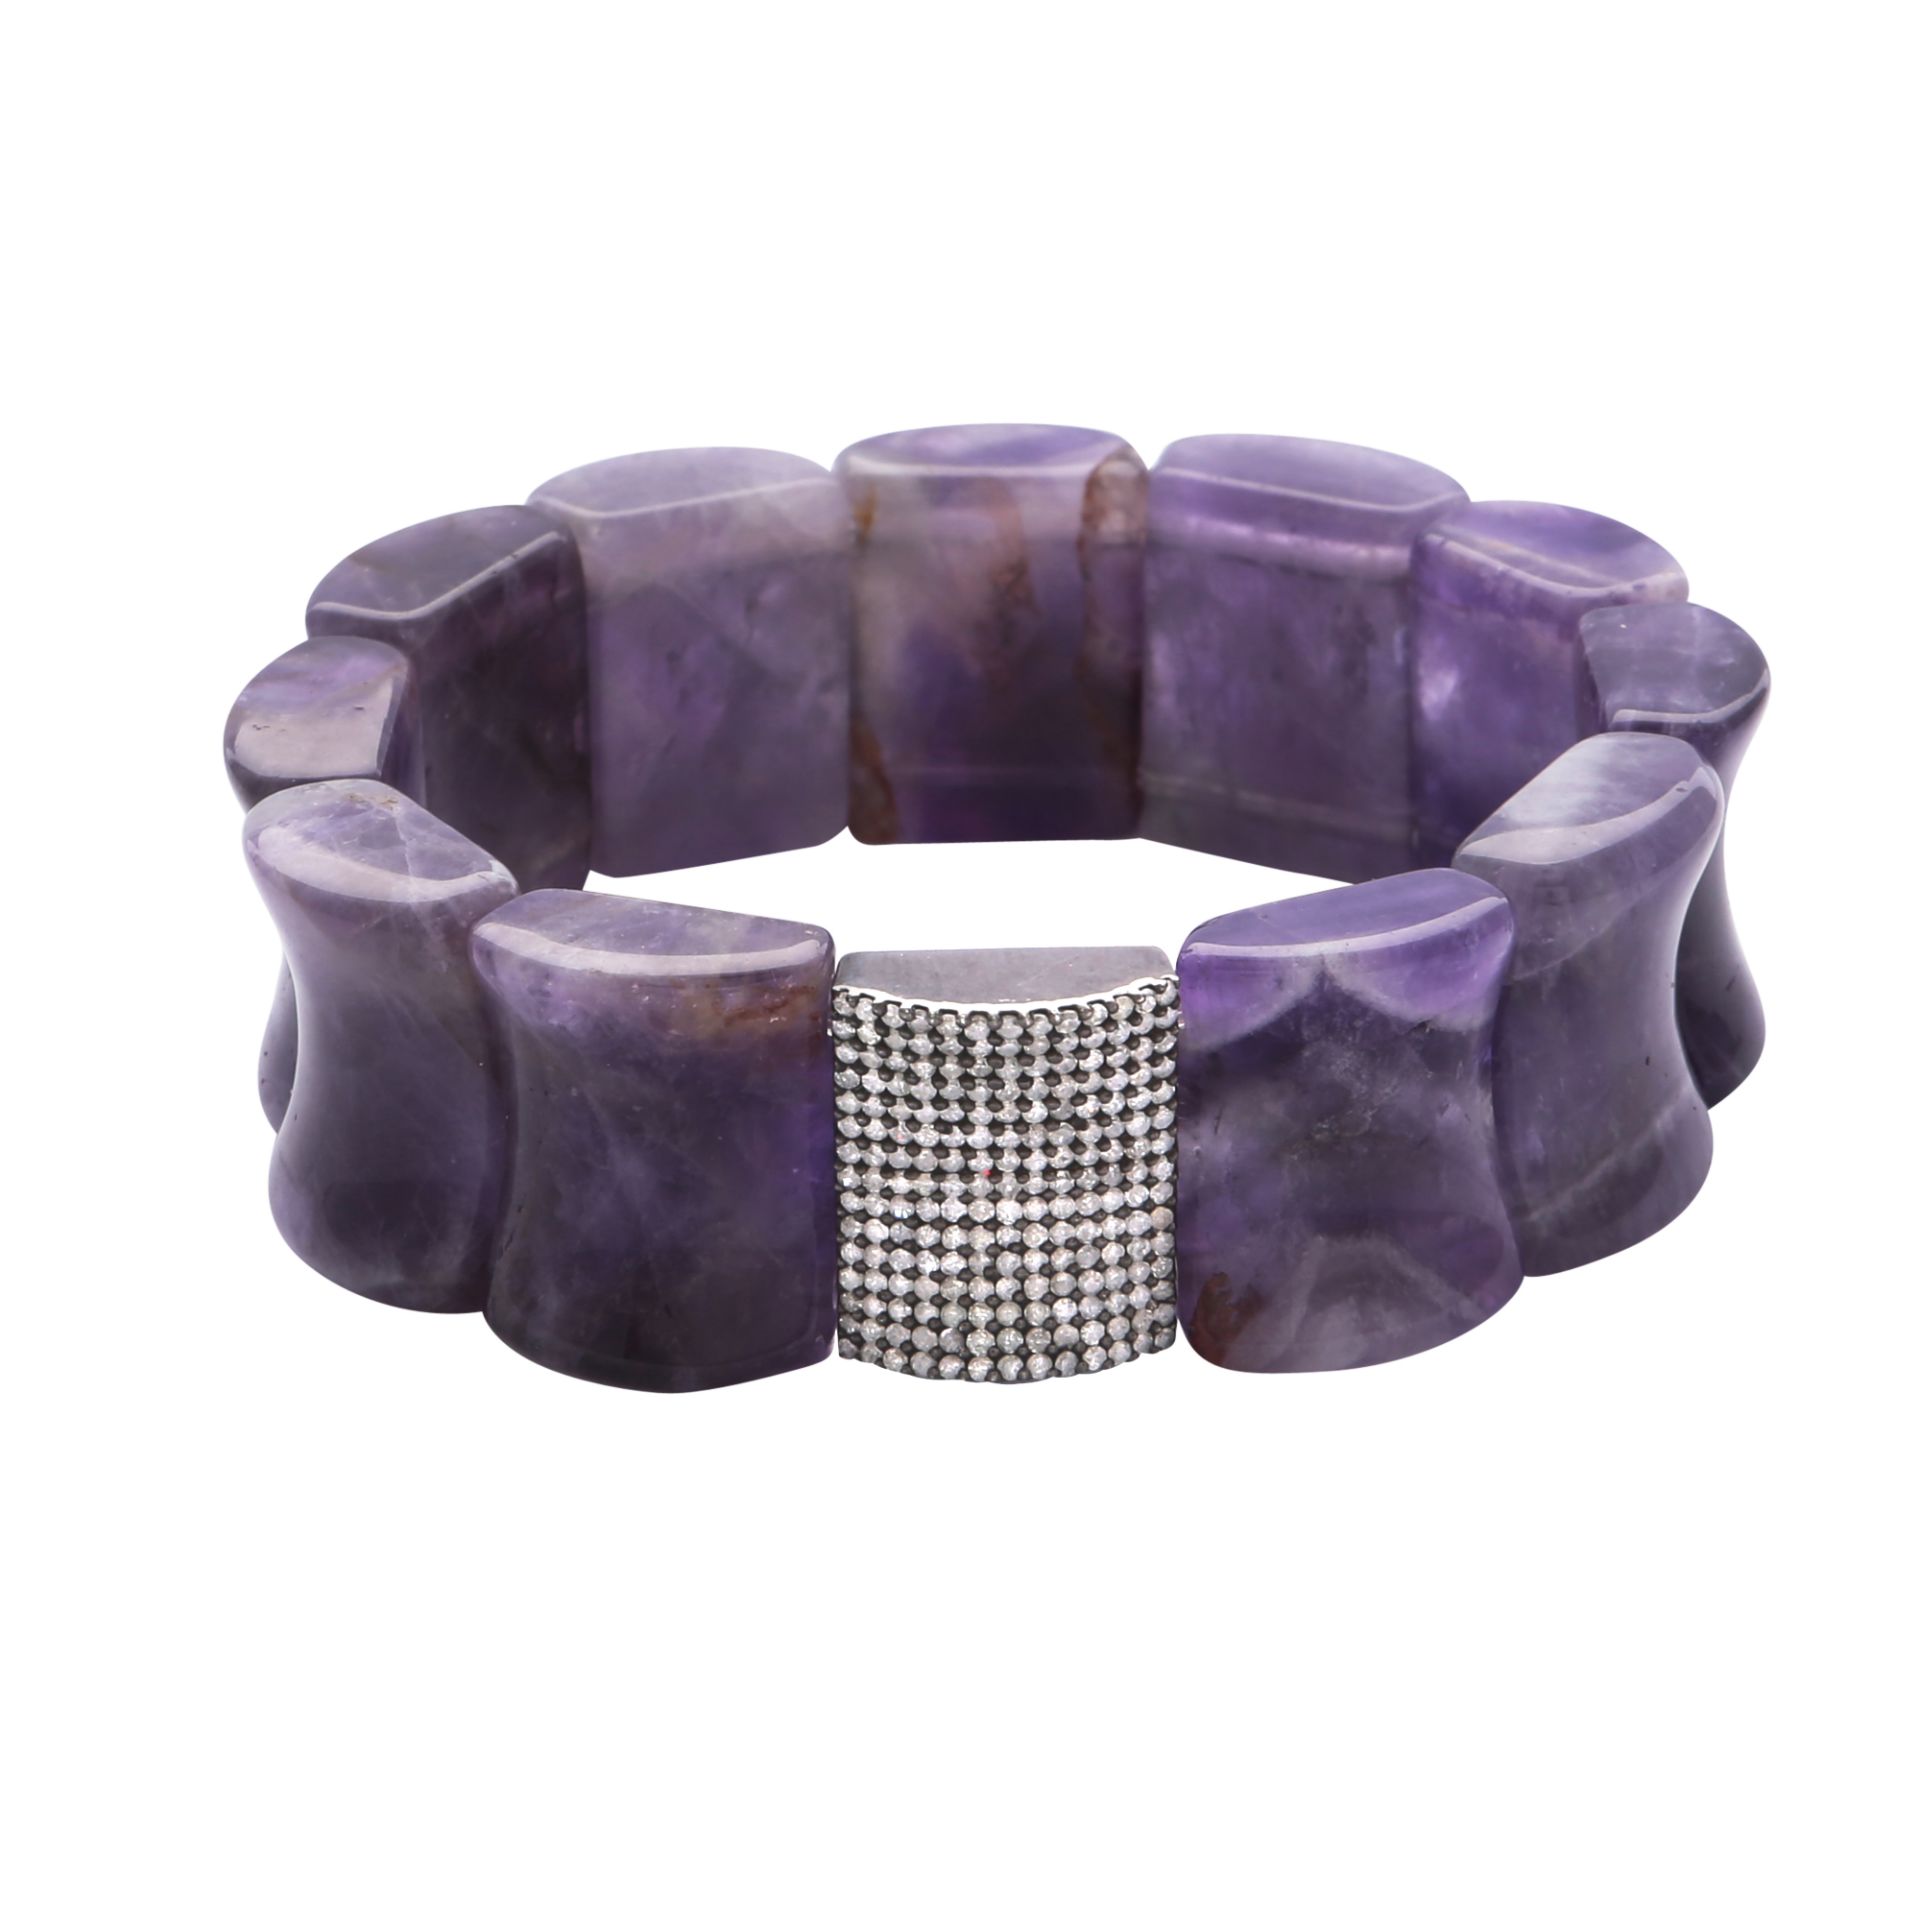 An amethyst and diamond bracelet designed as eleven carved amethyst panels punctuated by one